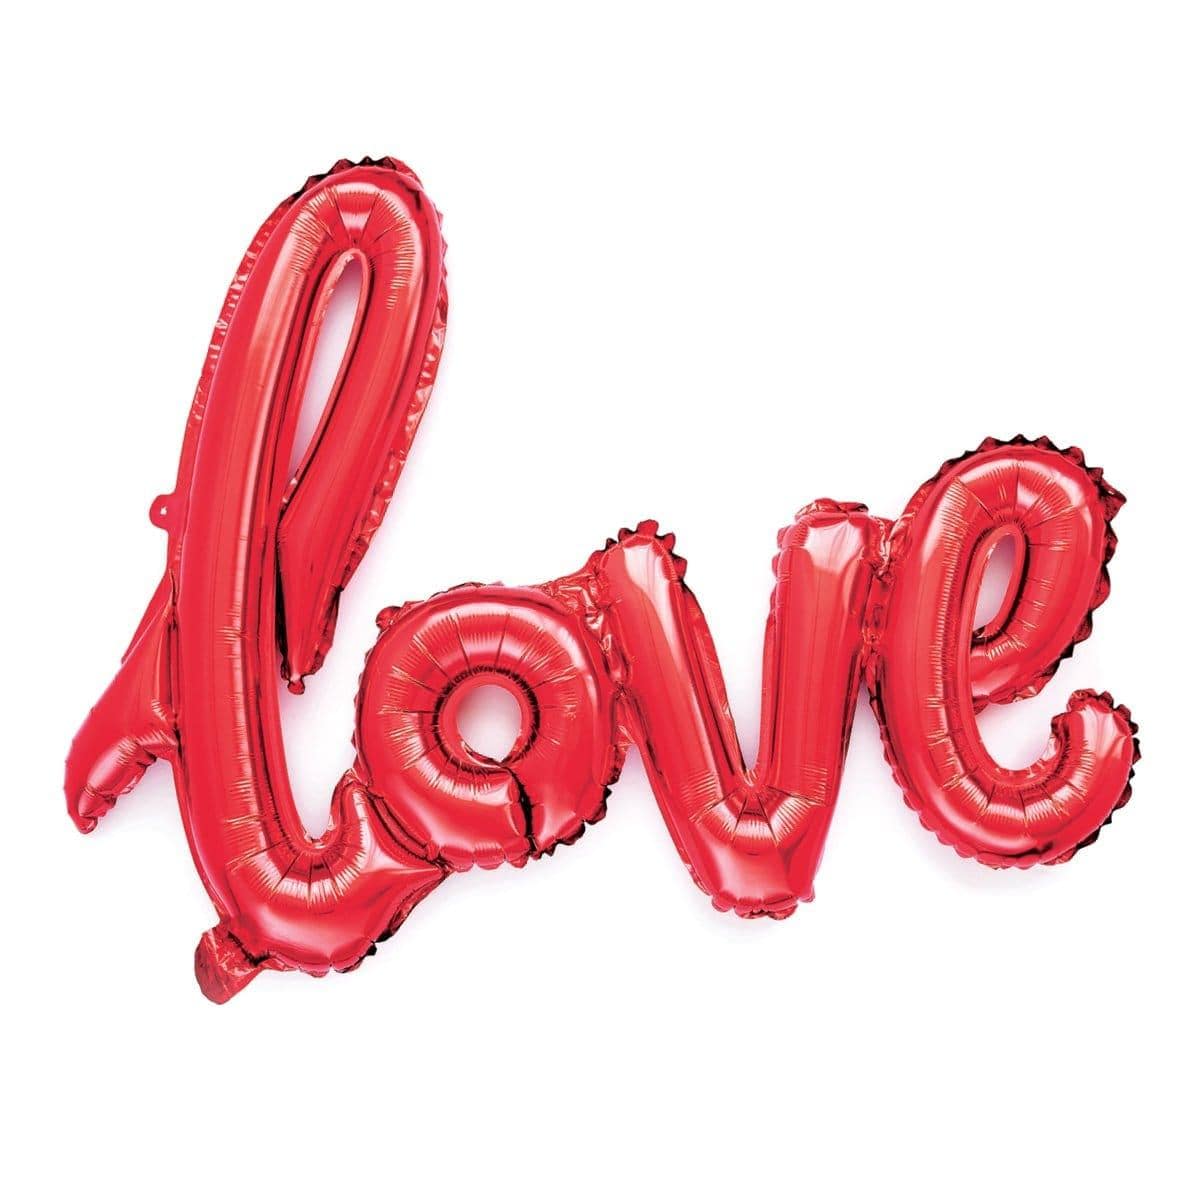 Buy Balloons Red Love Air Filled Foil Balloon sold at Party Expert